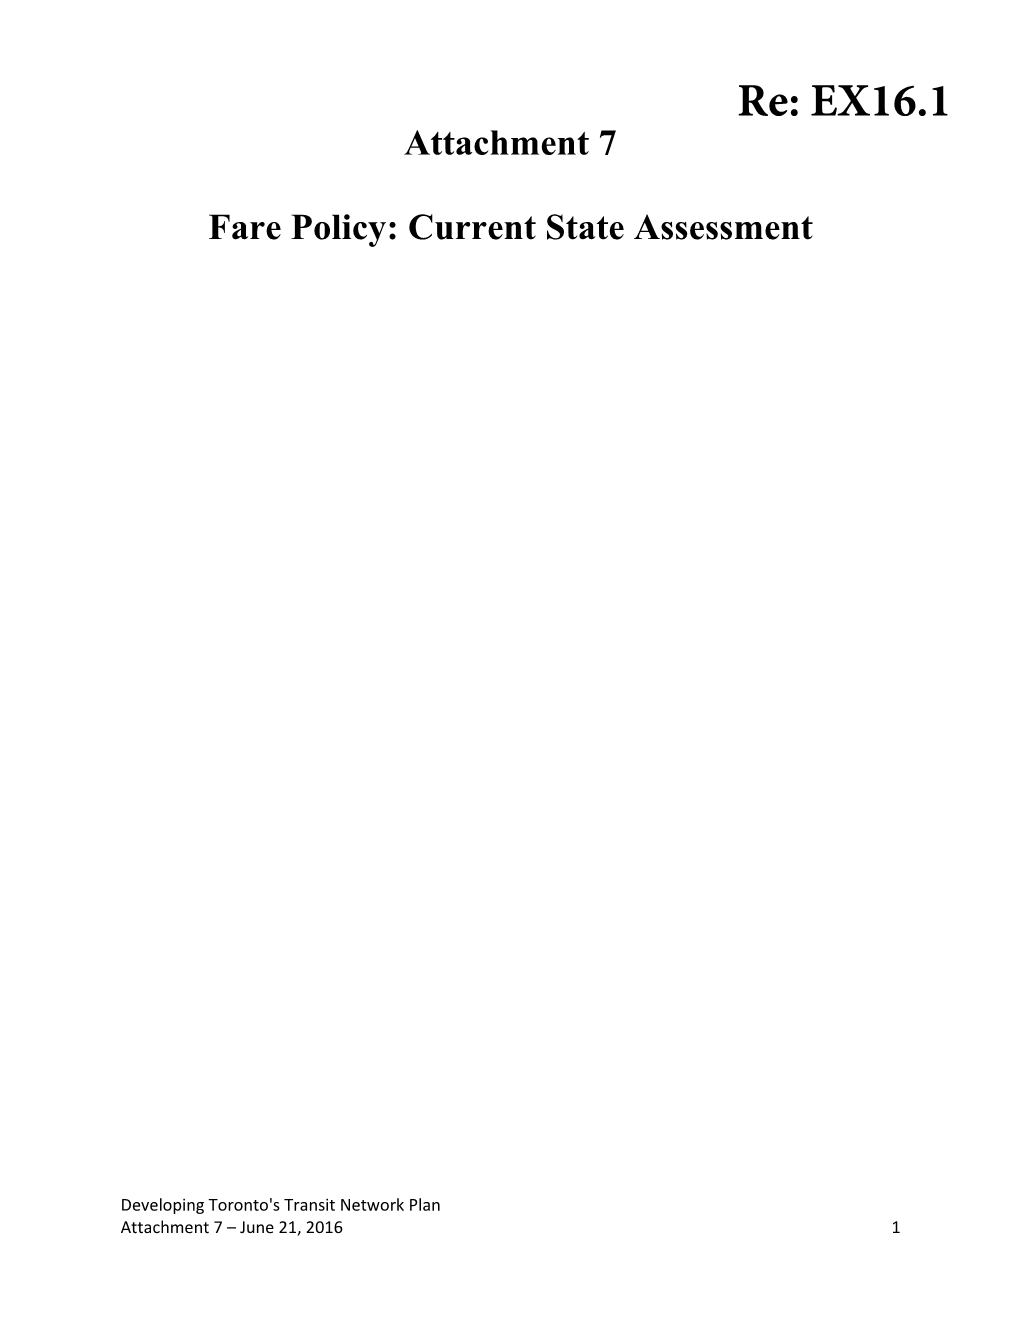 Fare Policy: Current State Assessment